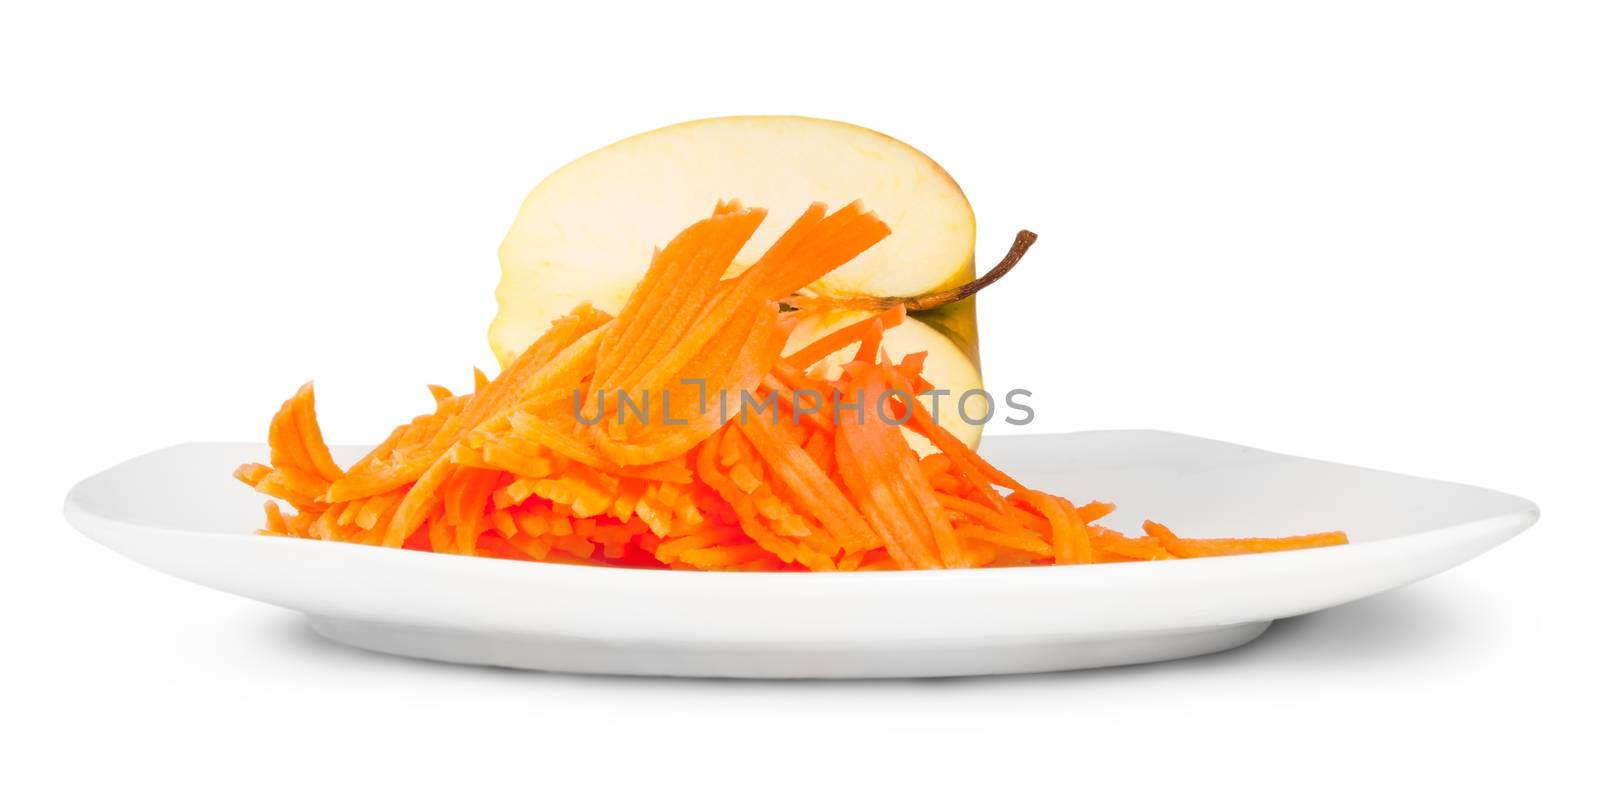 Half An Apple With Grated Carrot On White Plate by Cipariss